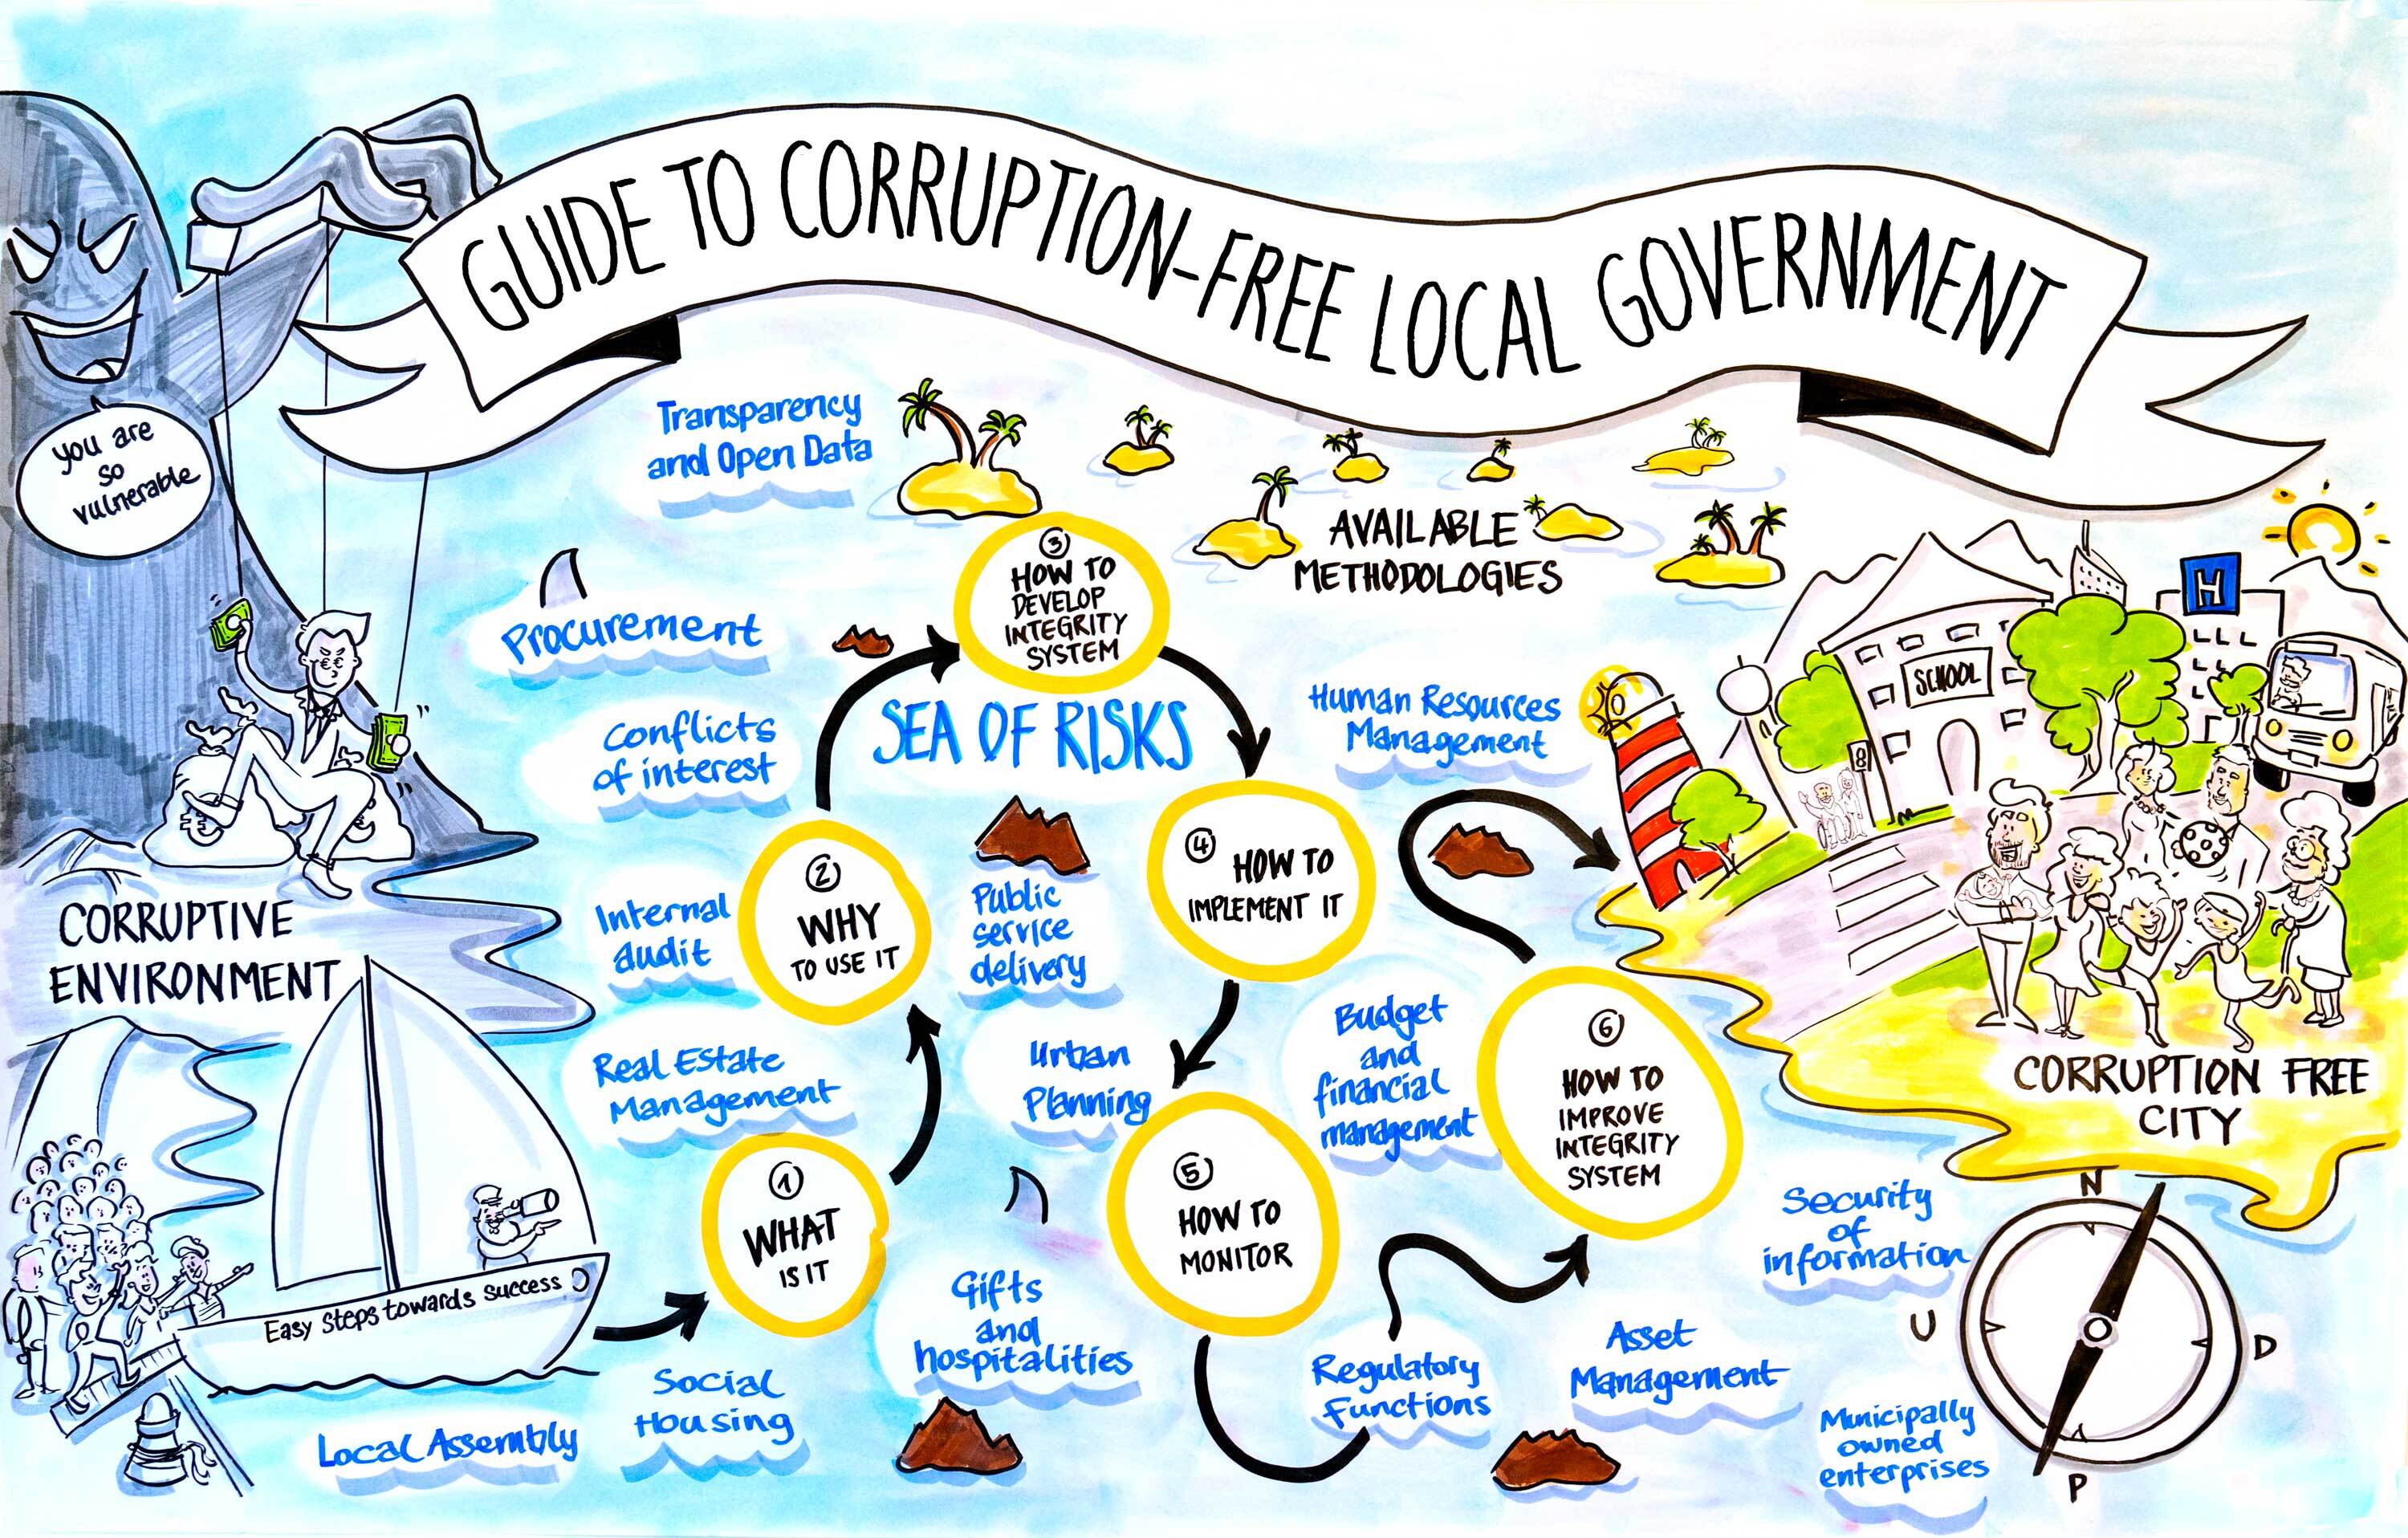 orruption-free-local-government.jpg